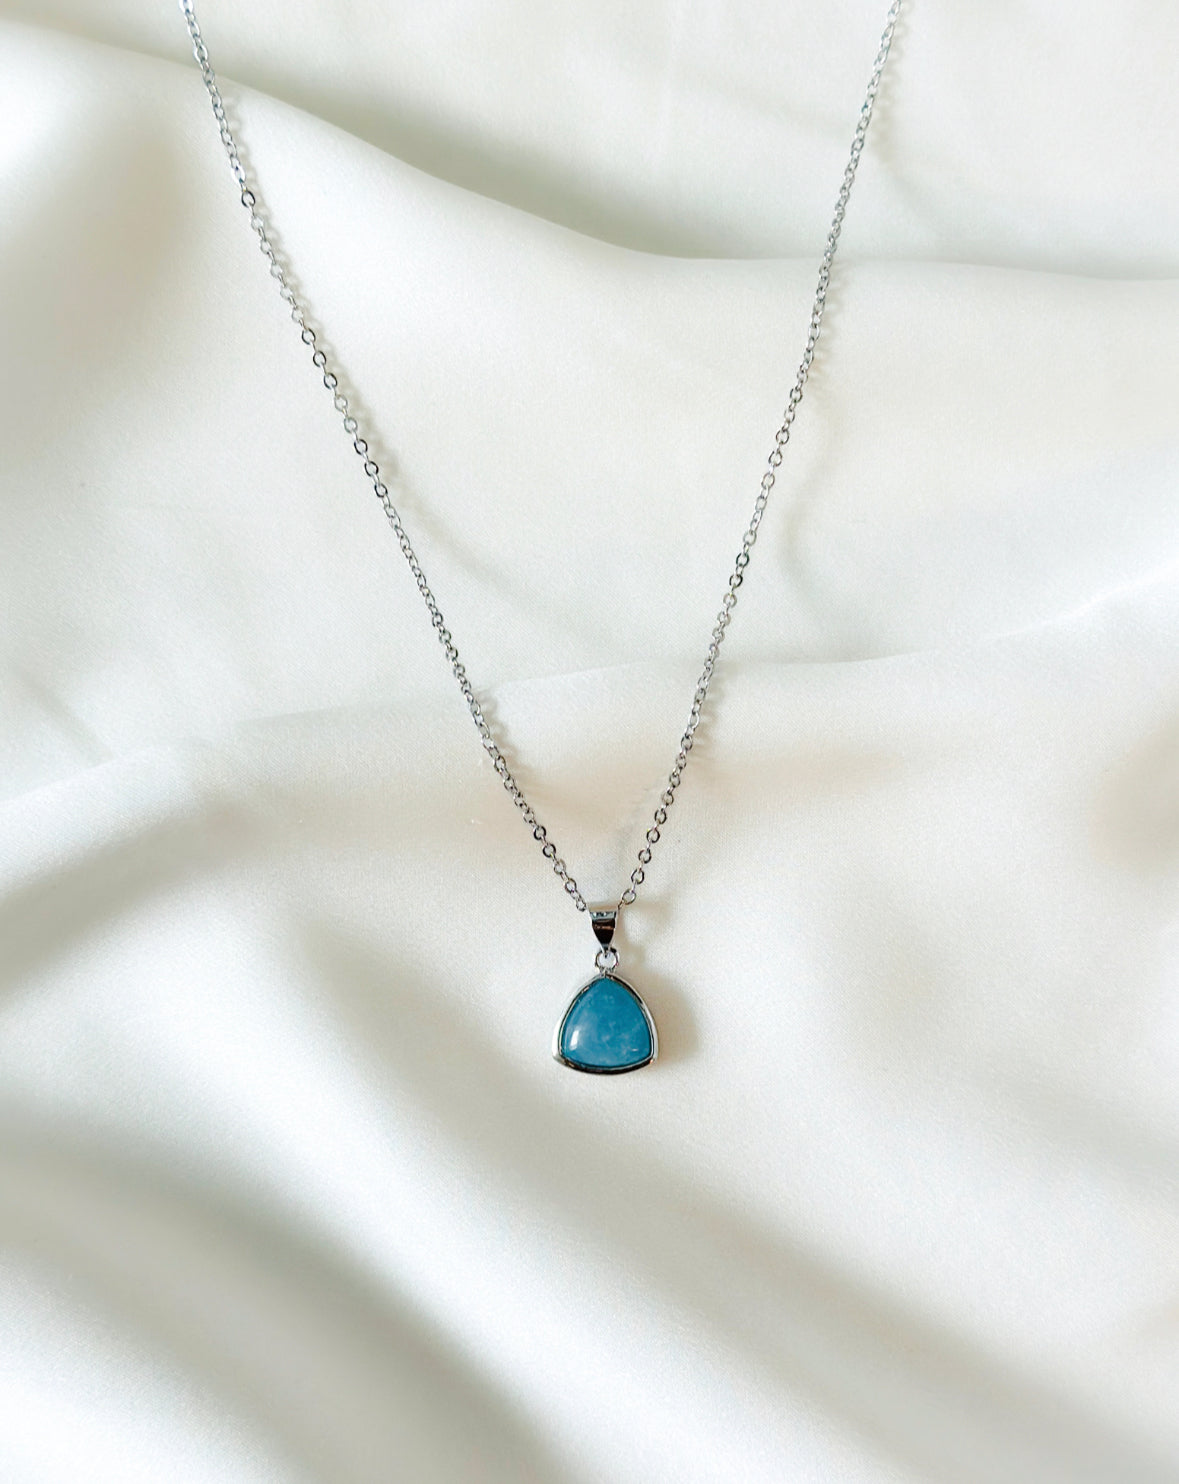 sterling silver necklace adorned with a stunning Aquamarine charm